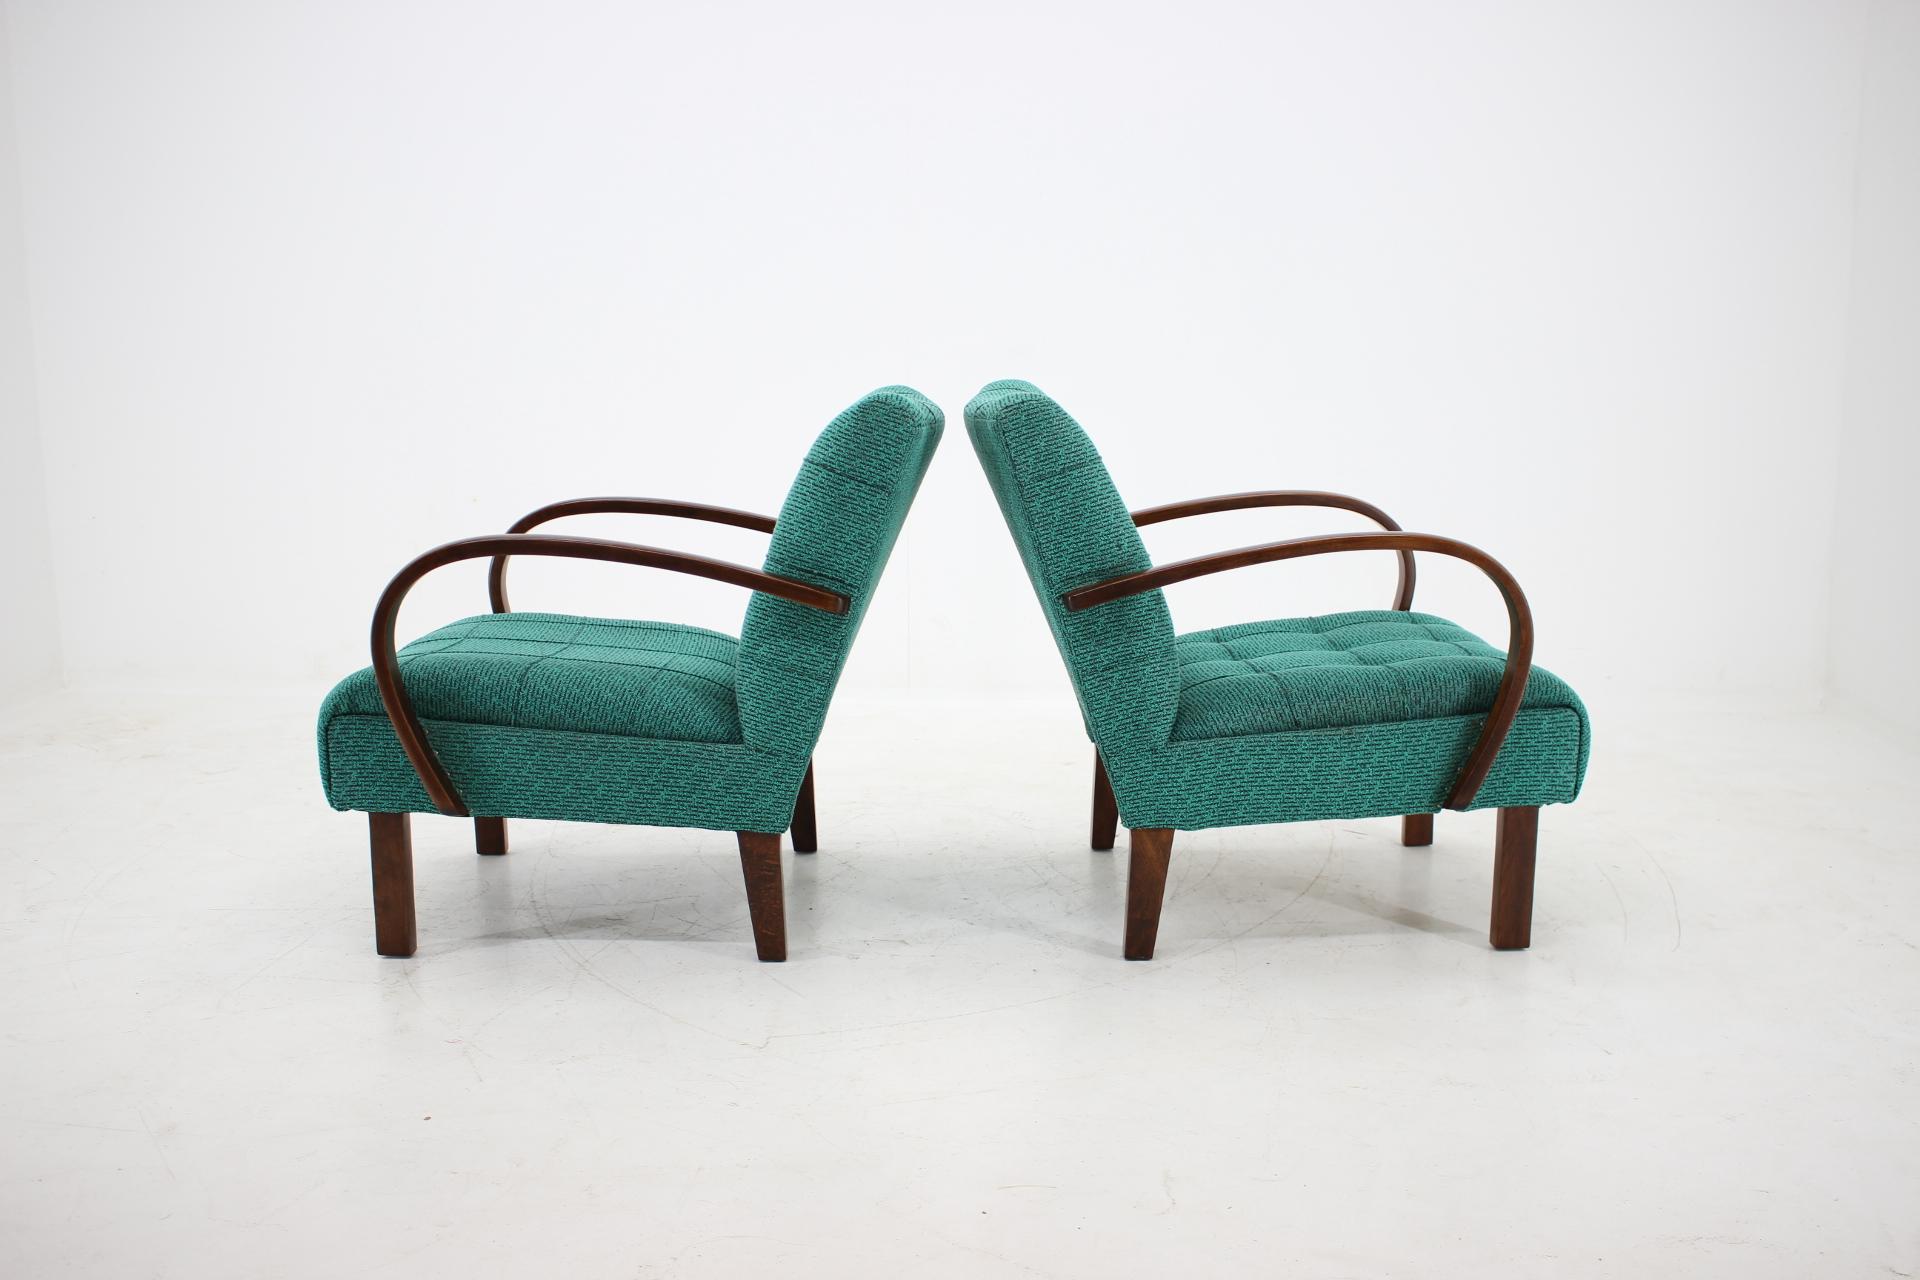 Czech Set of Two Rare Catalog Armchairs, Thonet, 1940s